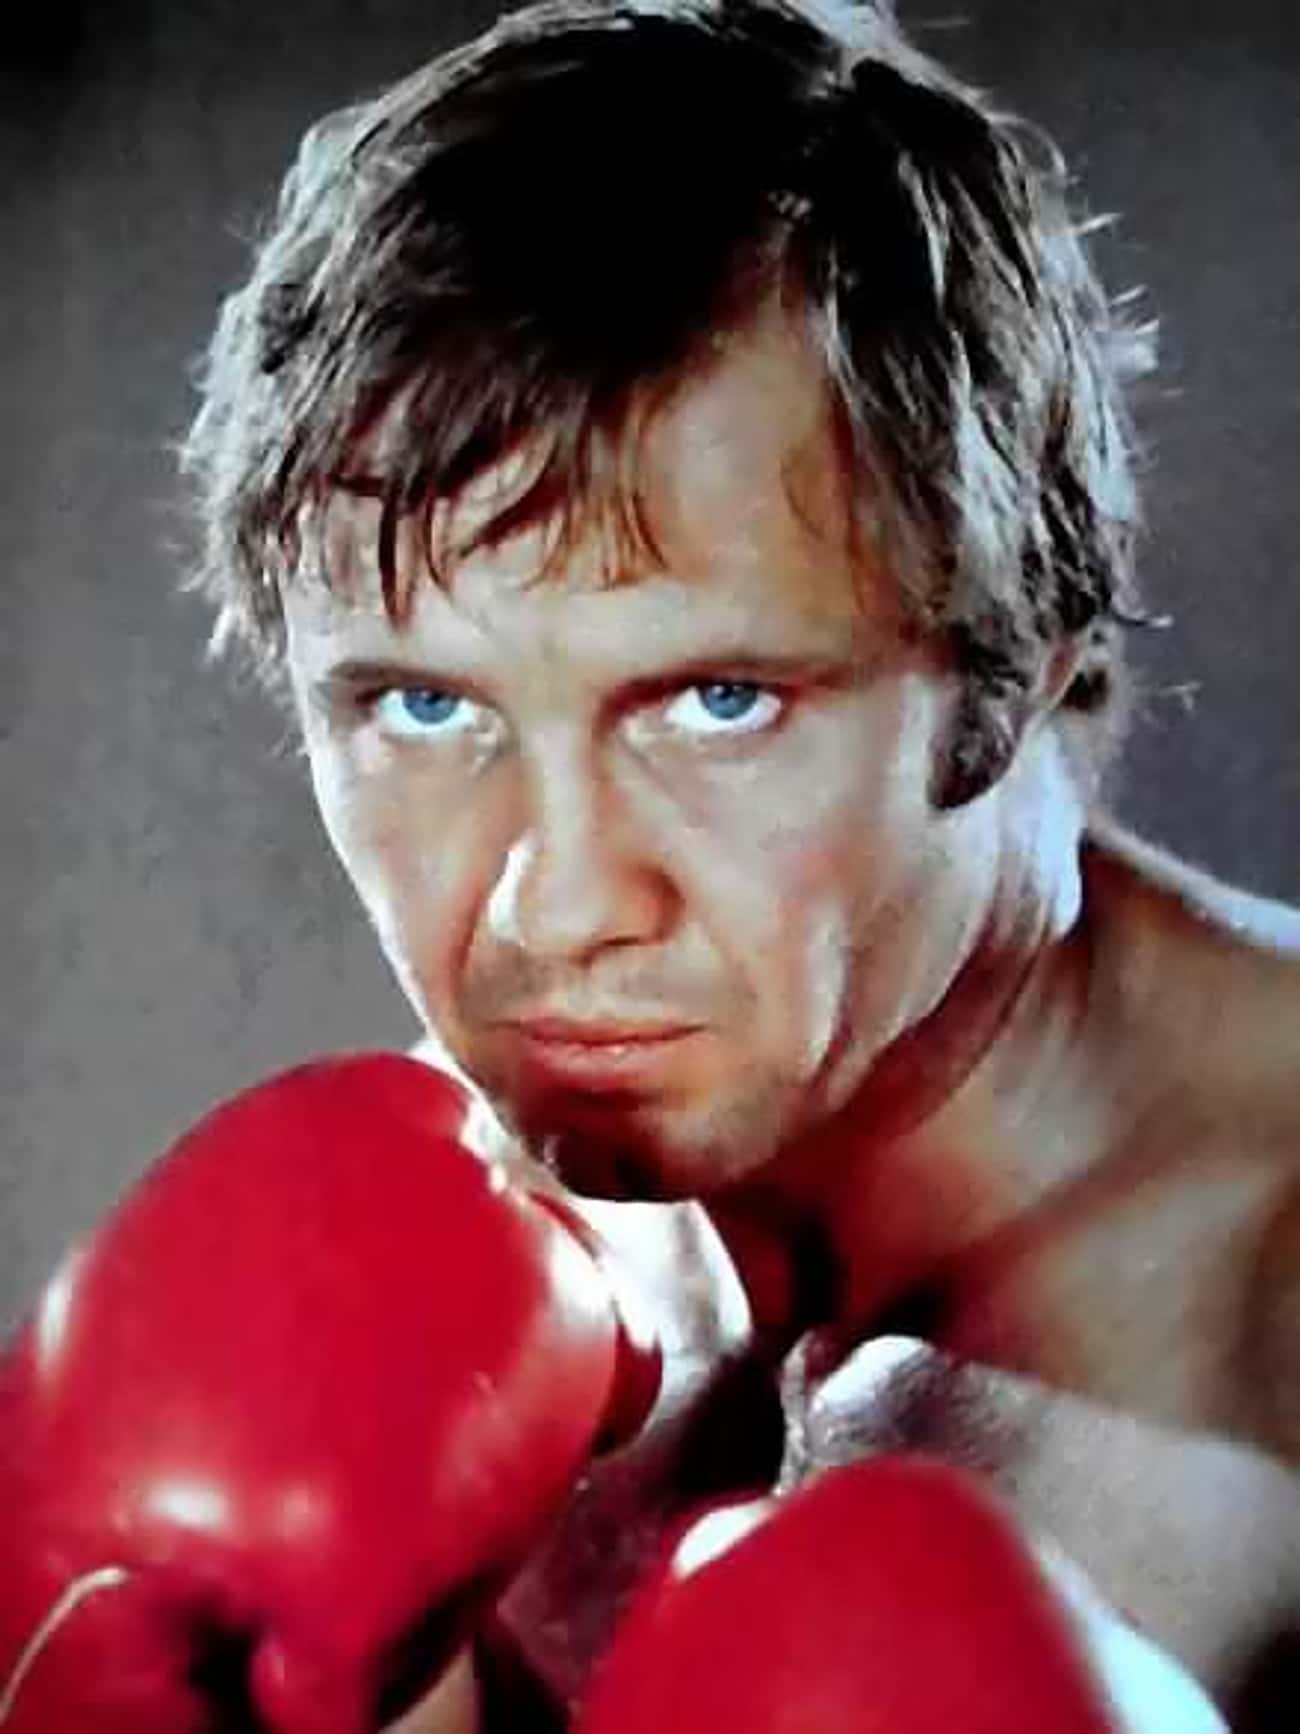 Young Jon Voight in Boxing Gloves